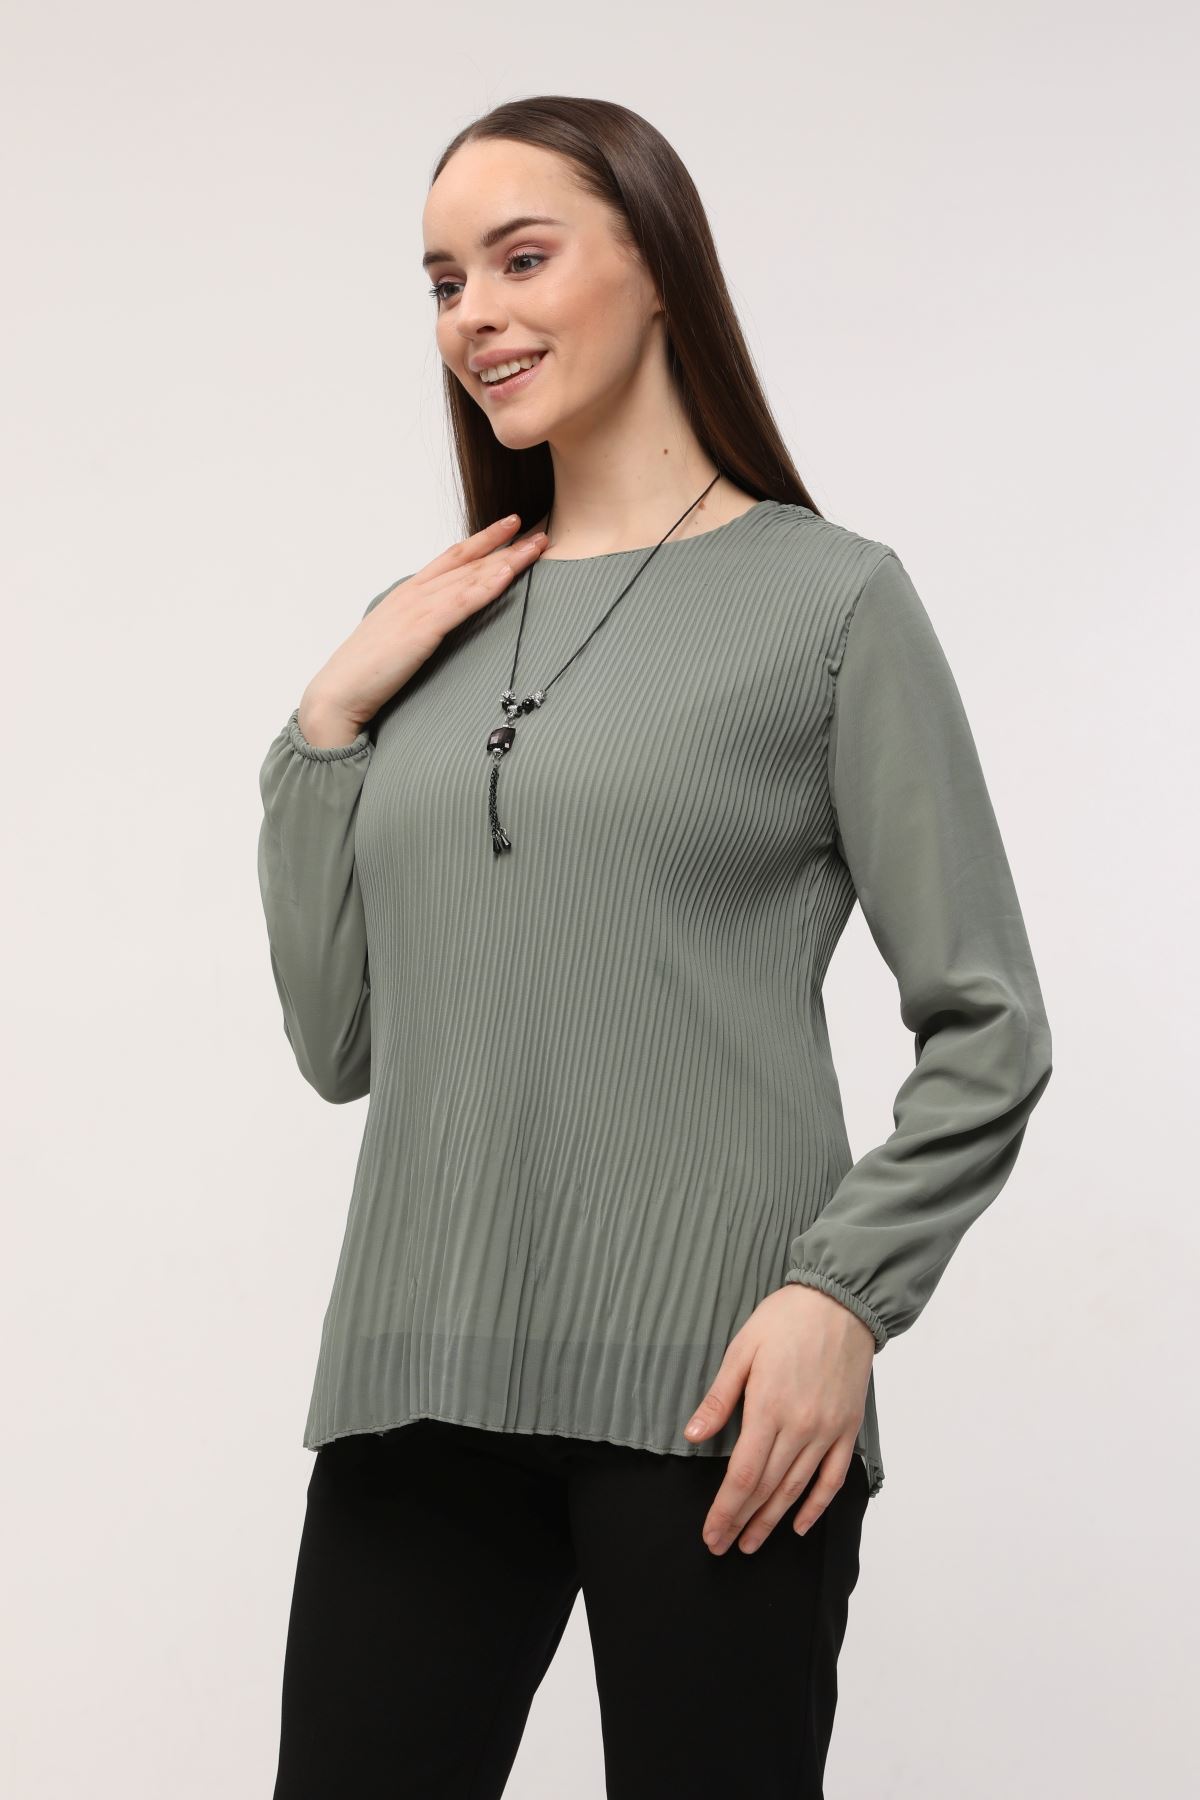 Chiffon Women's Blouse with Necklace